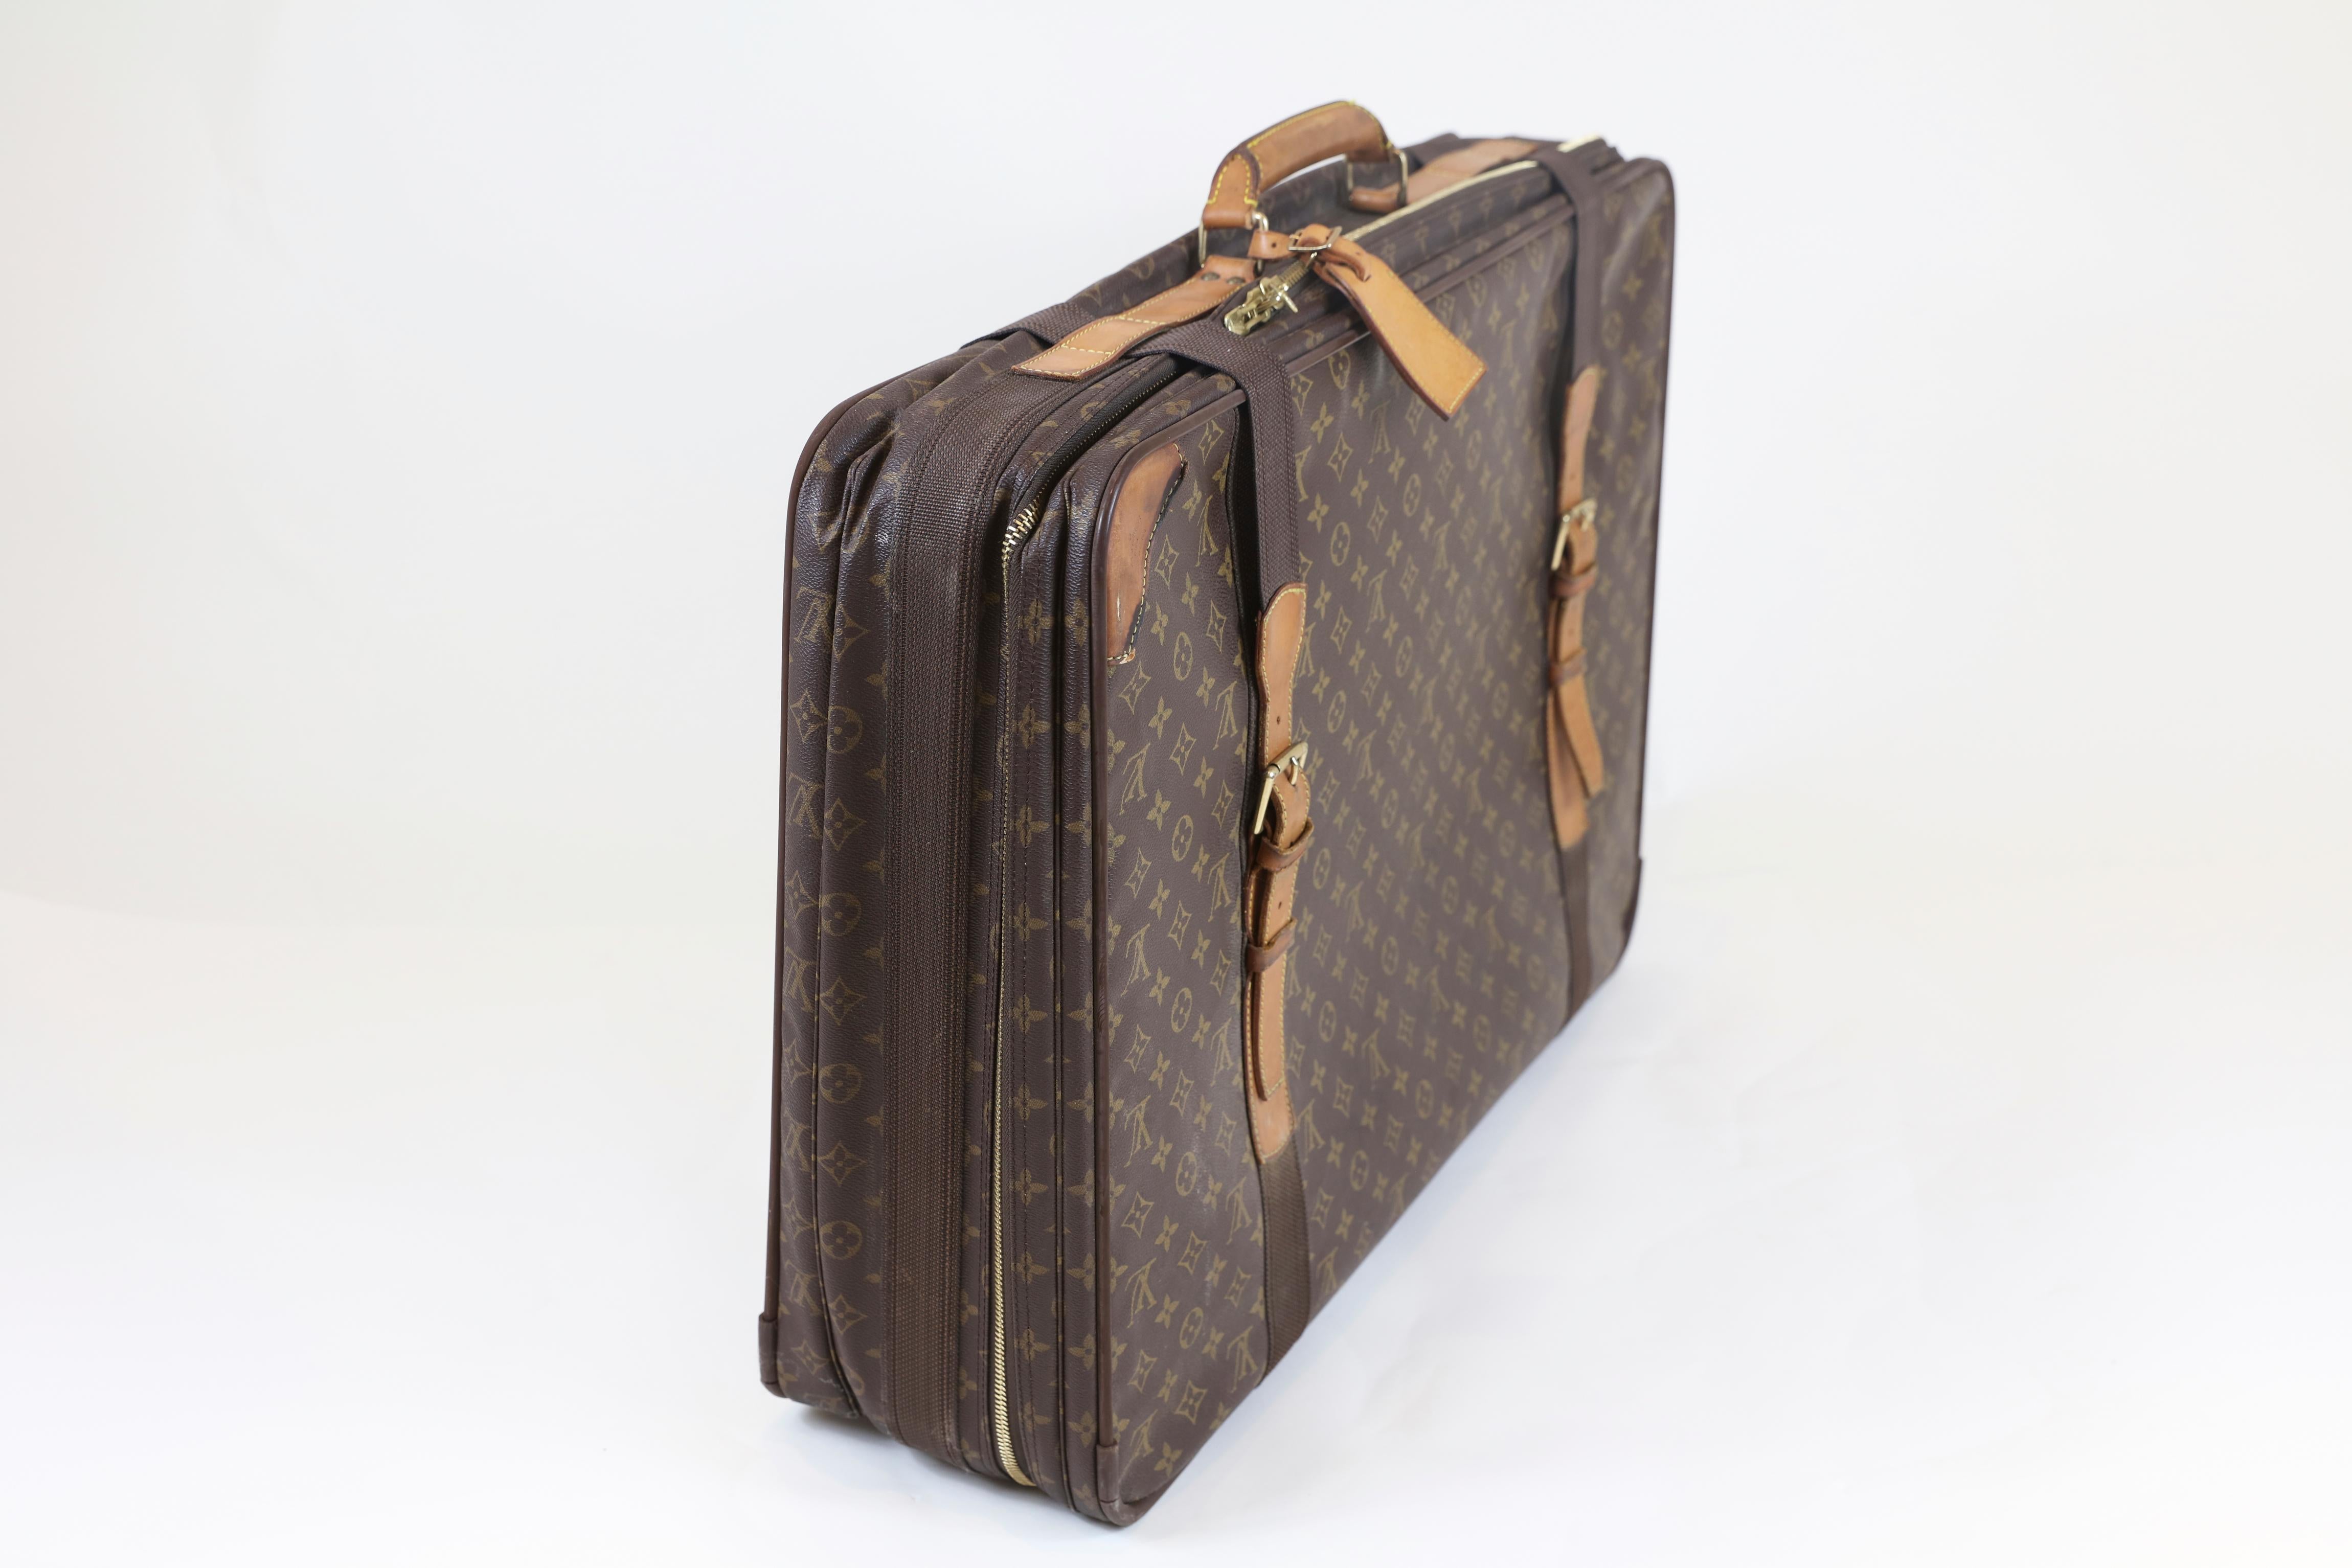 Black Louis Vuitton Soft Case Luggage with Straps